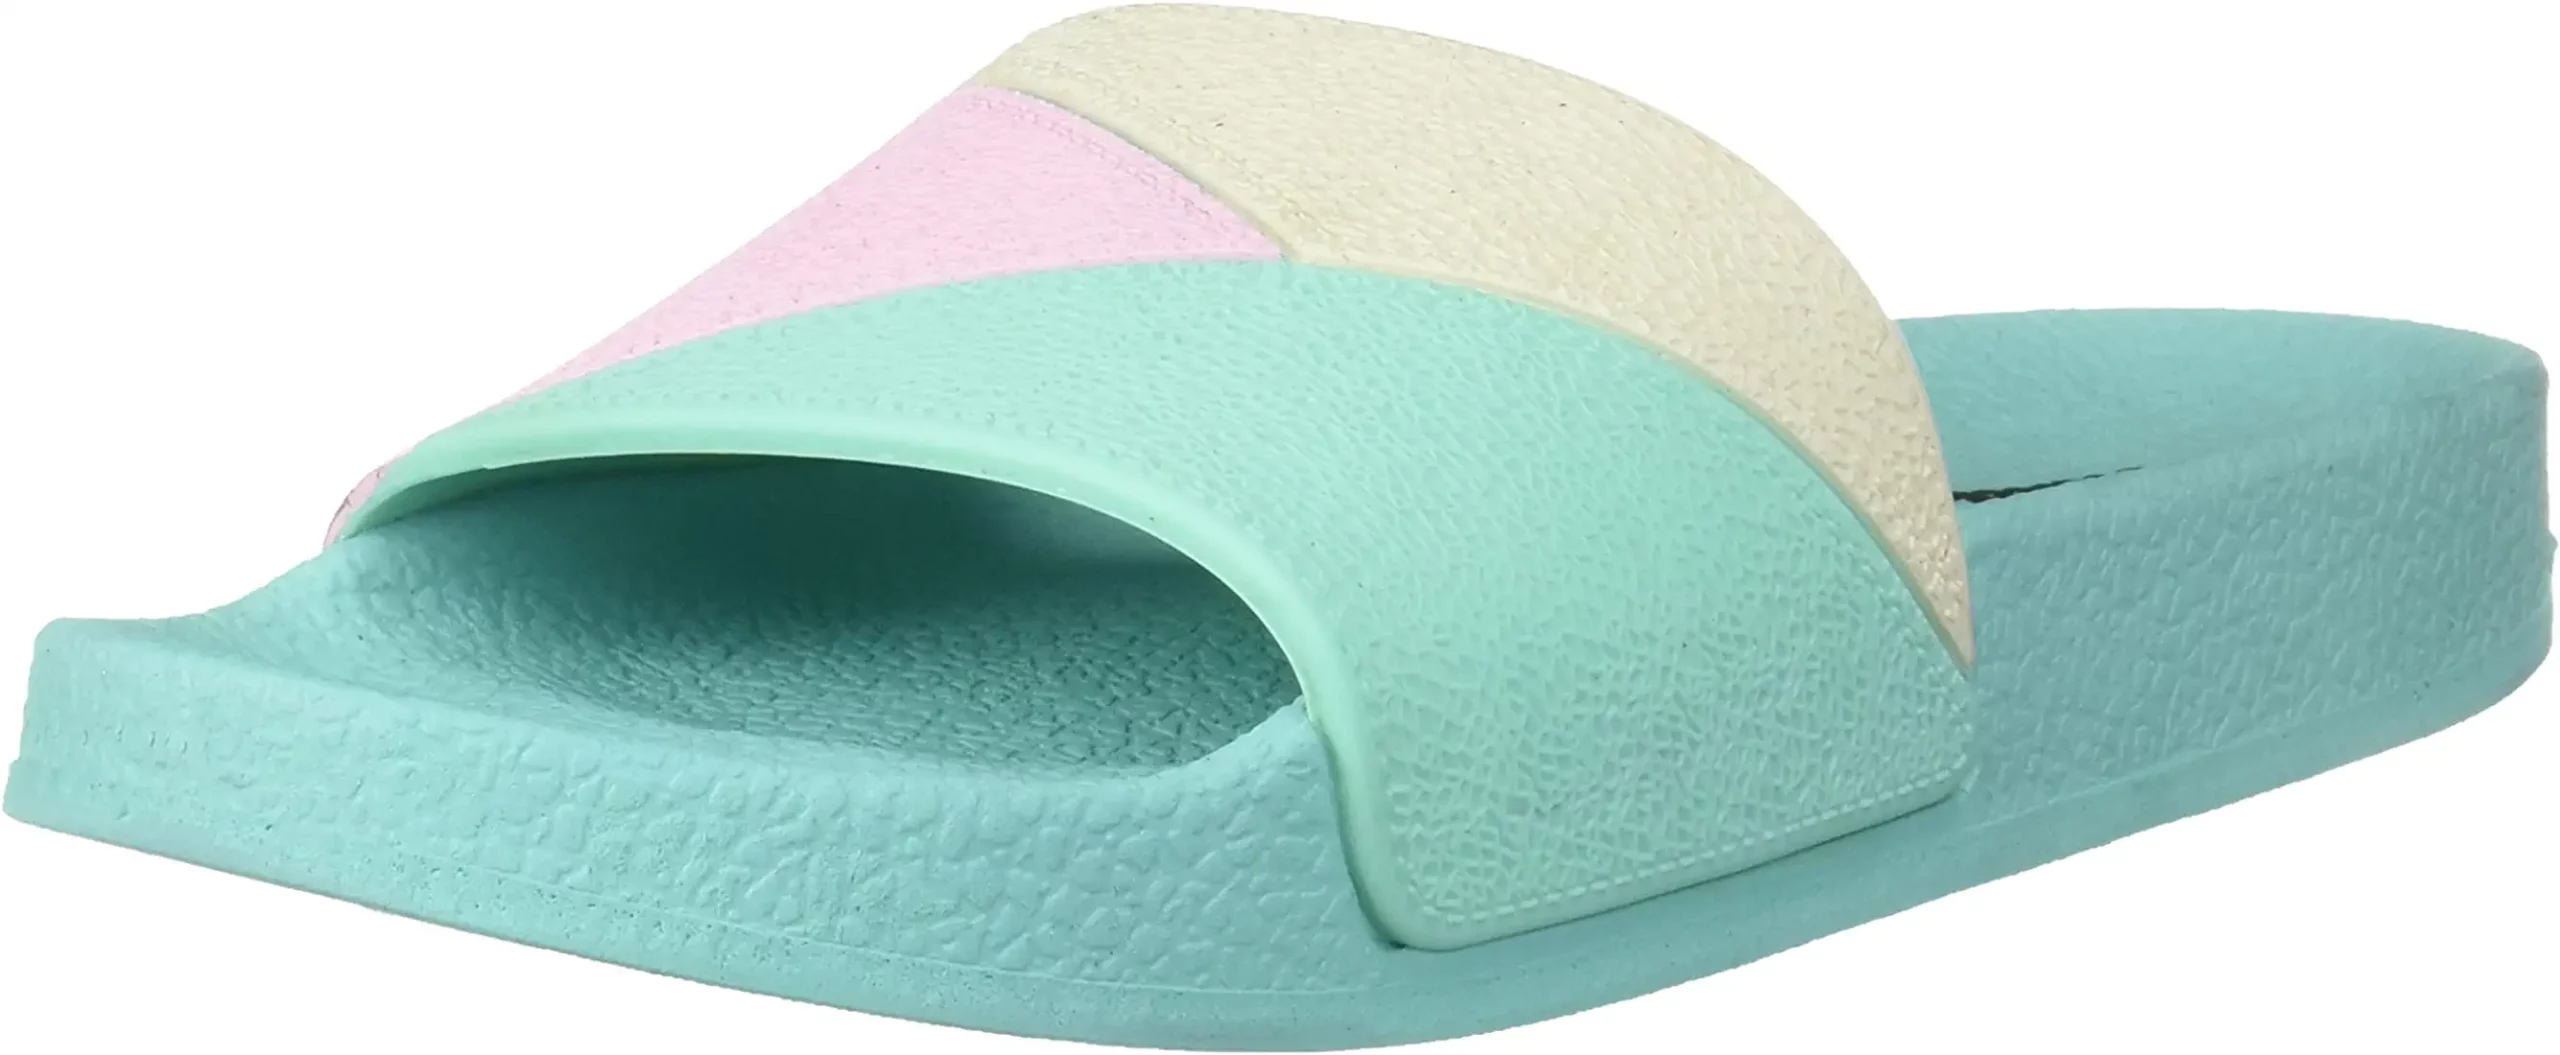 Womens lvy slippers